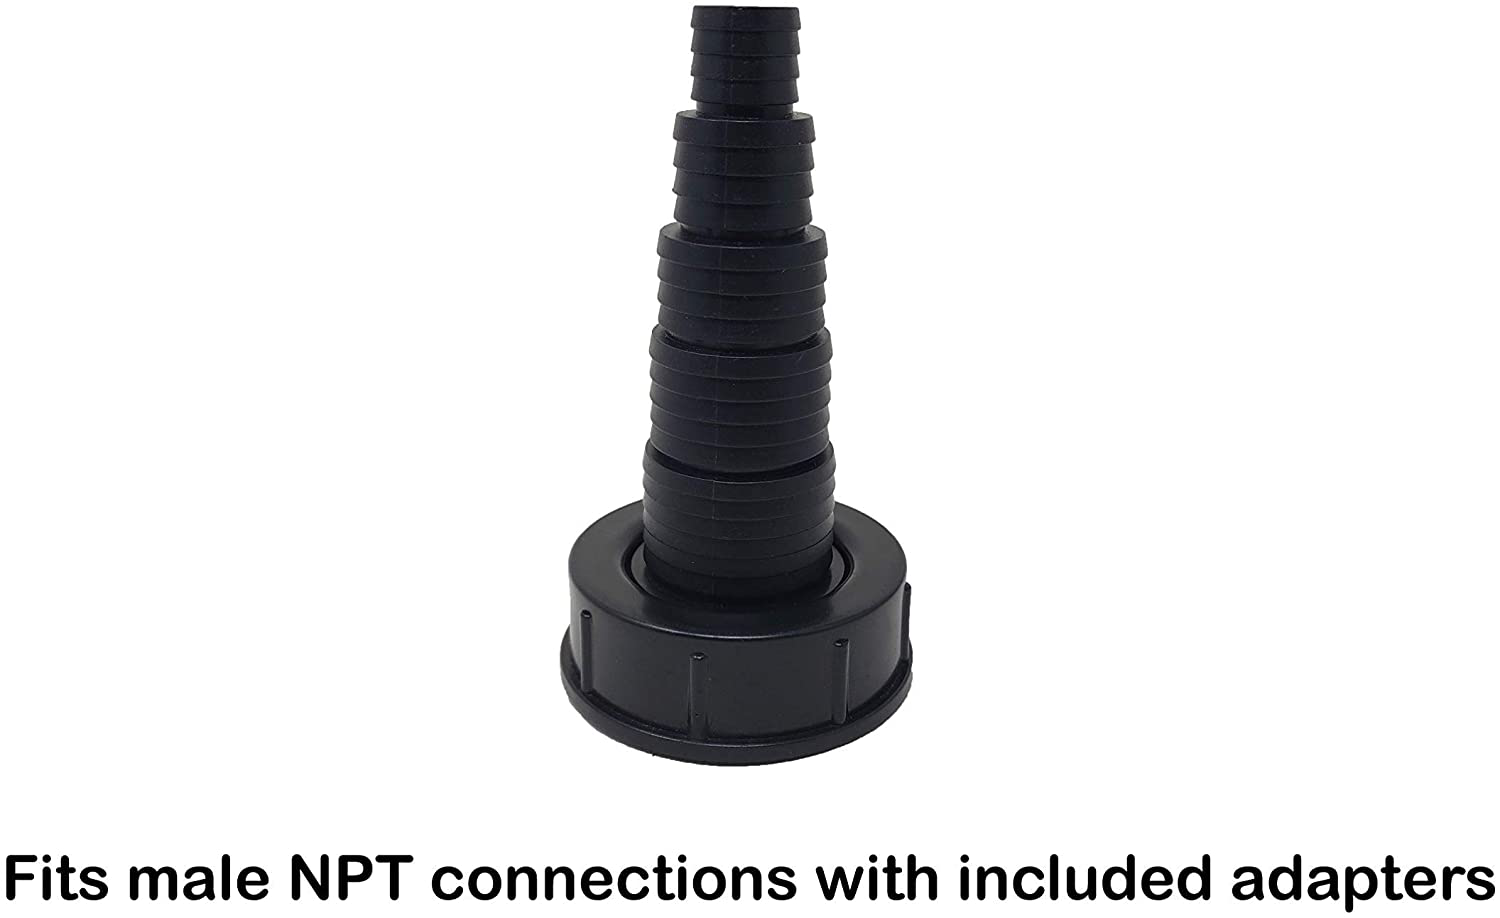 Sealproof Pond Tubing Pump Fitting, 30 Configurations, Works with Most Pumps, Fish Safe, Black Animals & Pet Supplies > Pet Supplies > Fish Supplies > Aquarium & Pond Tubing Sealproof   